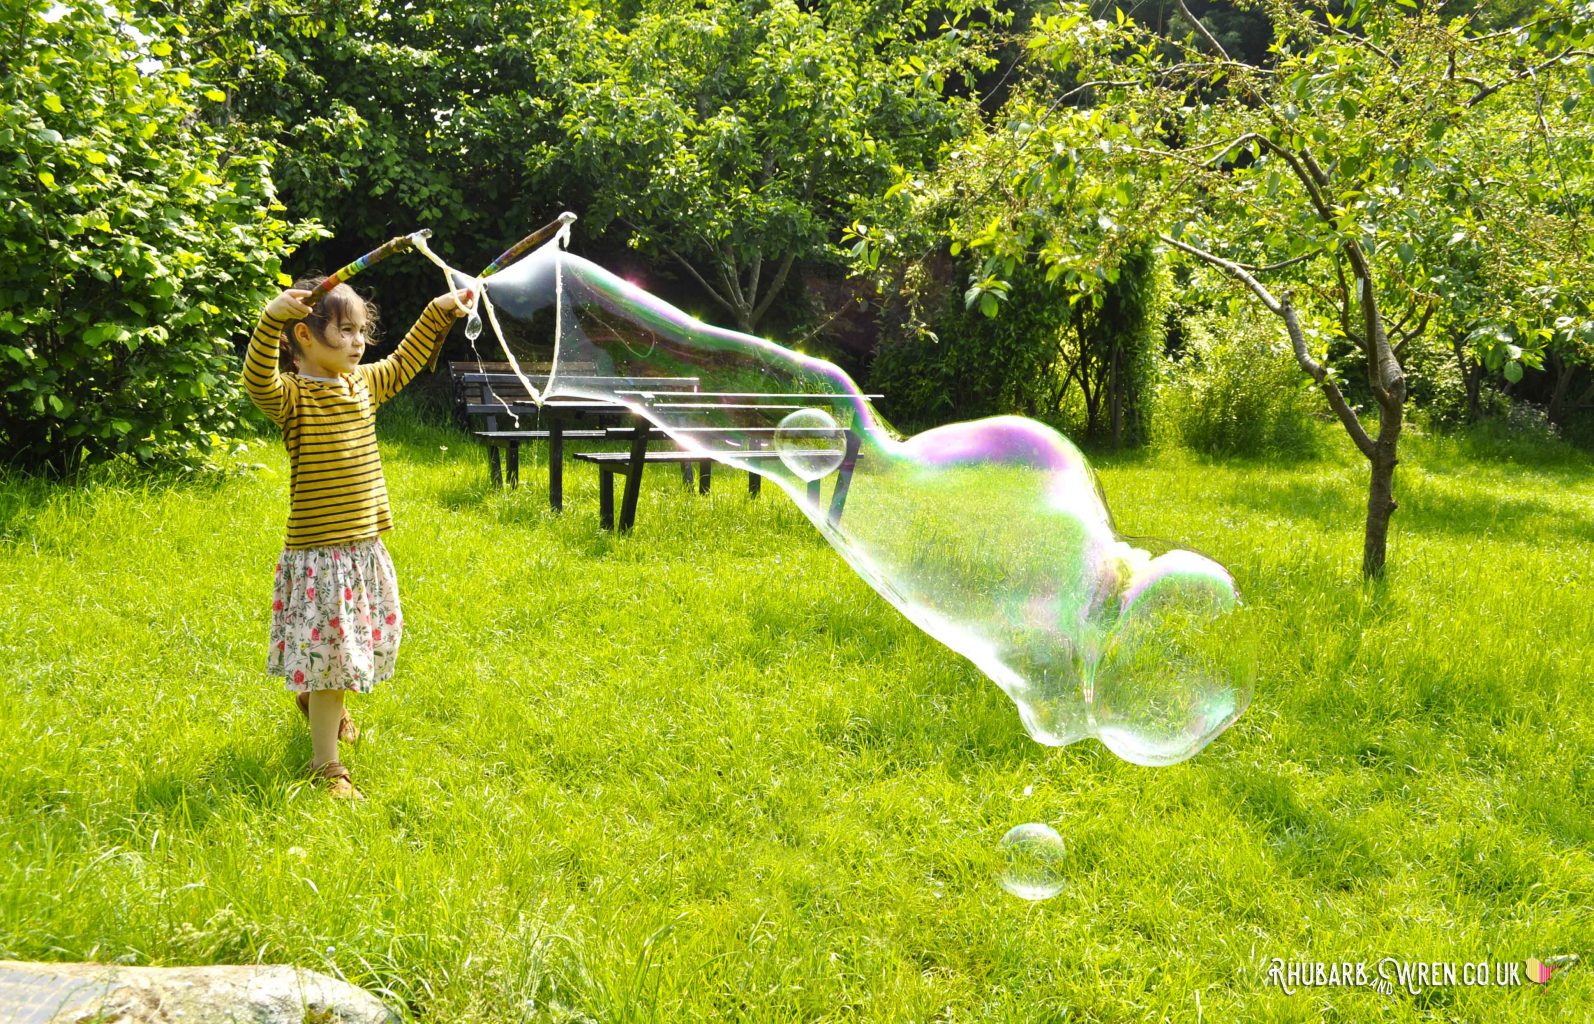 2 Pieces Giant Bubble Wands Rope Kit Outdoor Activities Making Long Huge Bubbles 